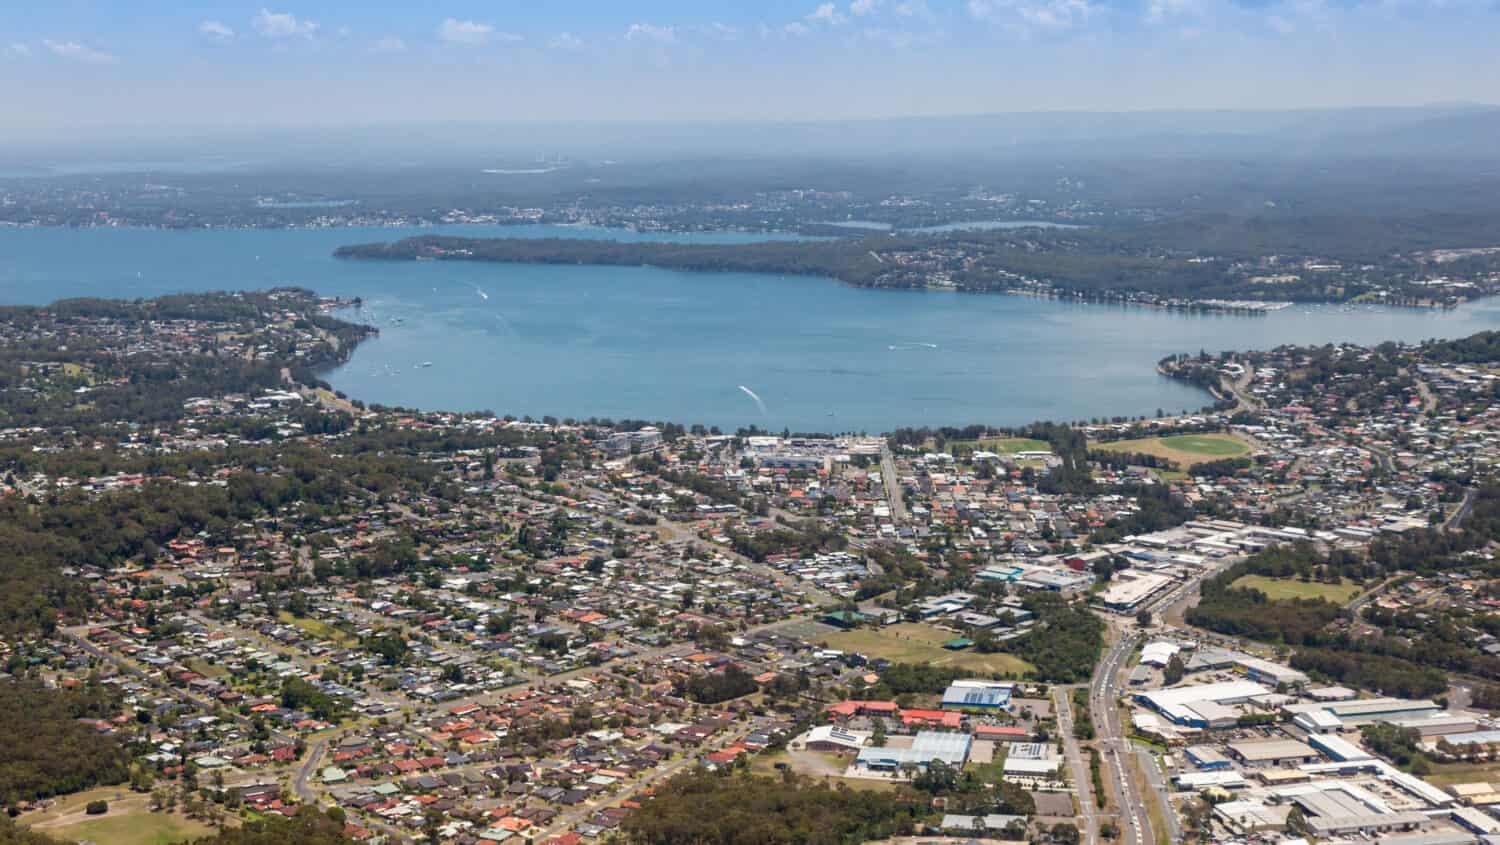 Aerial view of Lake Macquarie and Warners Bay - Newcastle Australia. The largest coastal lake in Australia is a popular area 25 minutes south of Newcastle CBD.